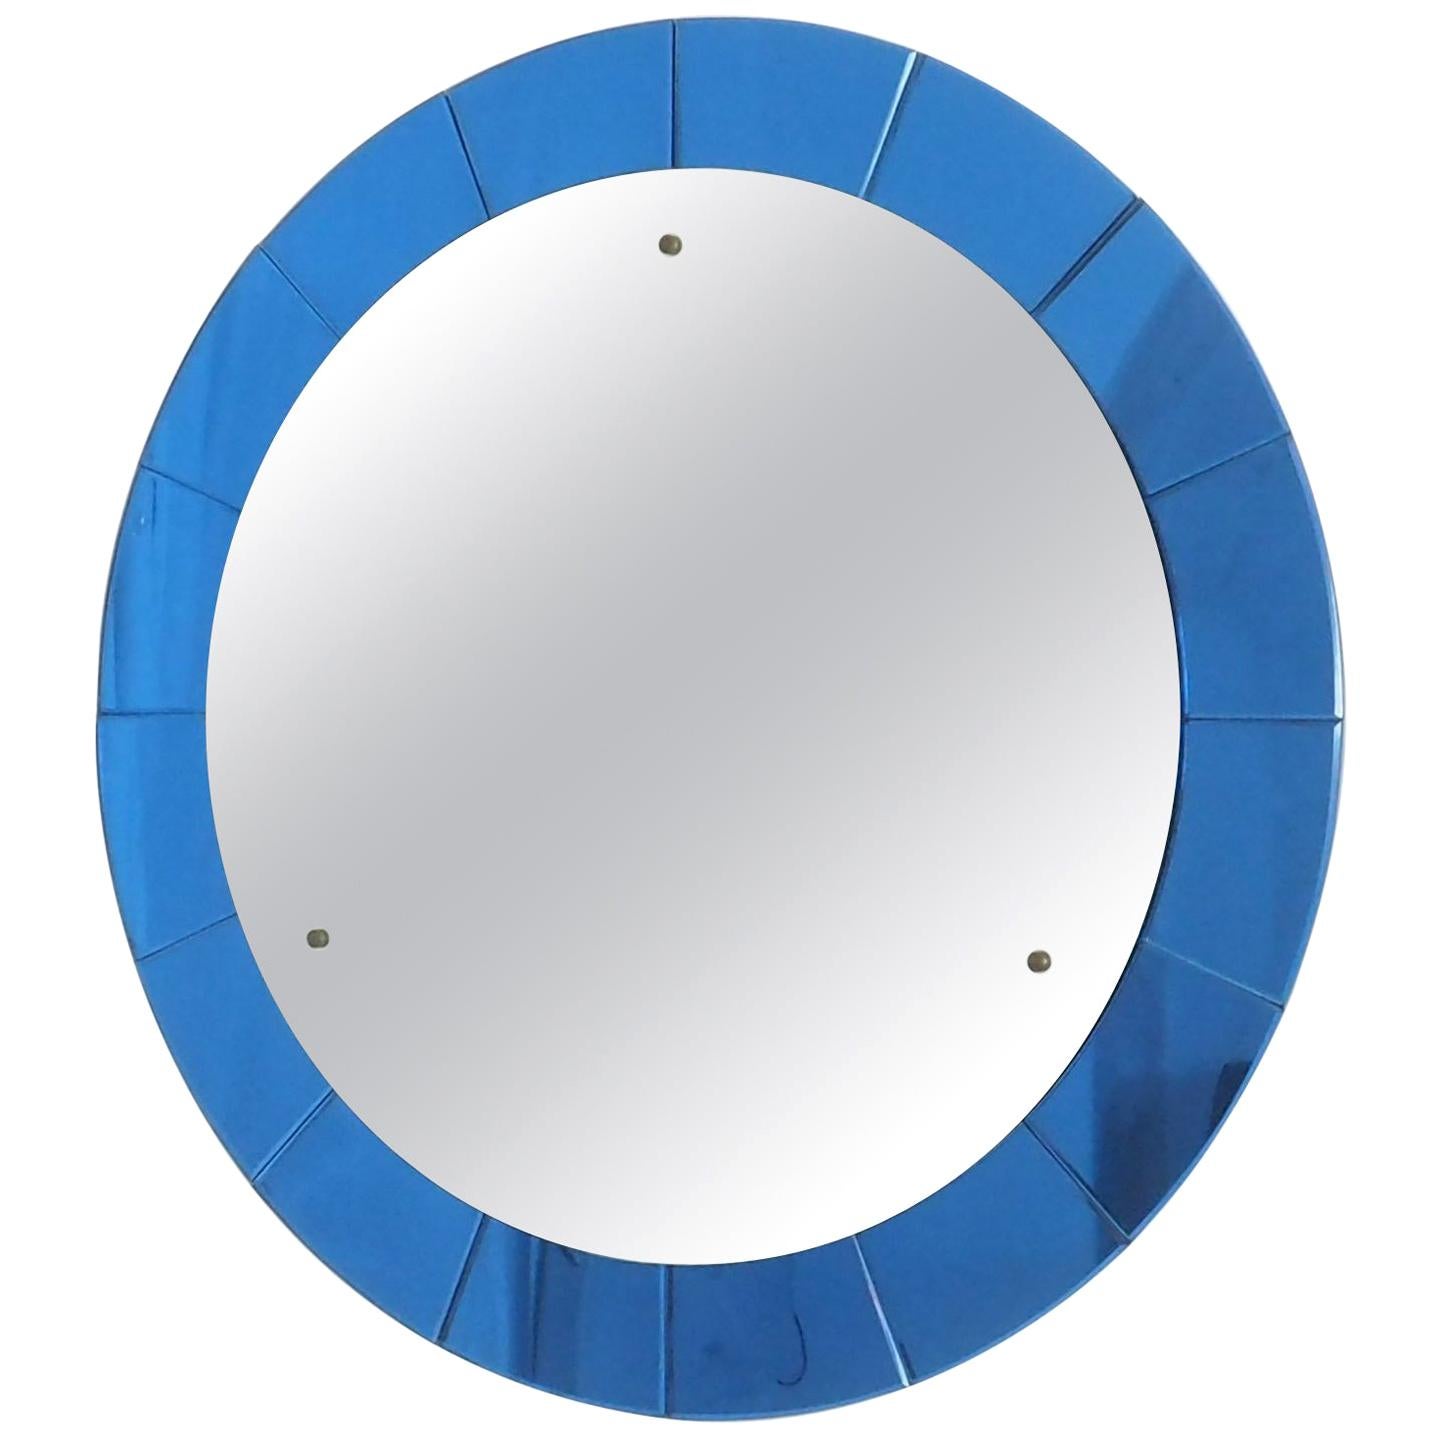 Mid-Century Modern Monumental Blue Round Wall Mirror by Cristal Arte, Italy 1950 For Sale